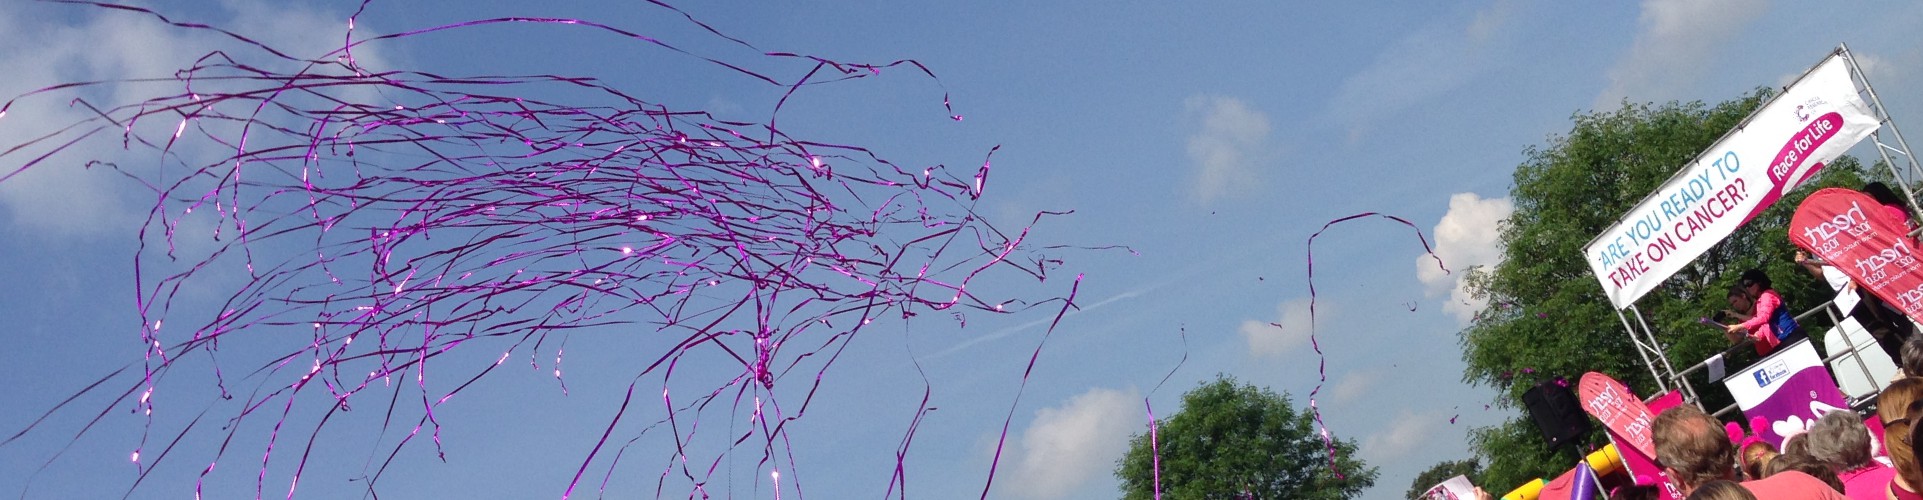 pink streamers shoot over a crowd